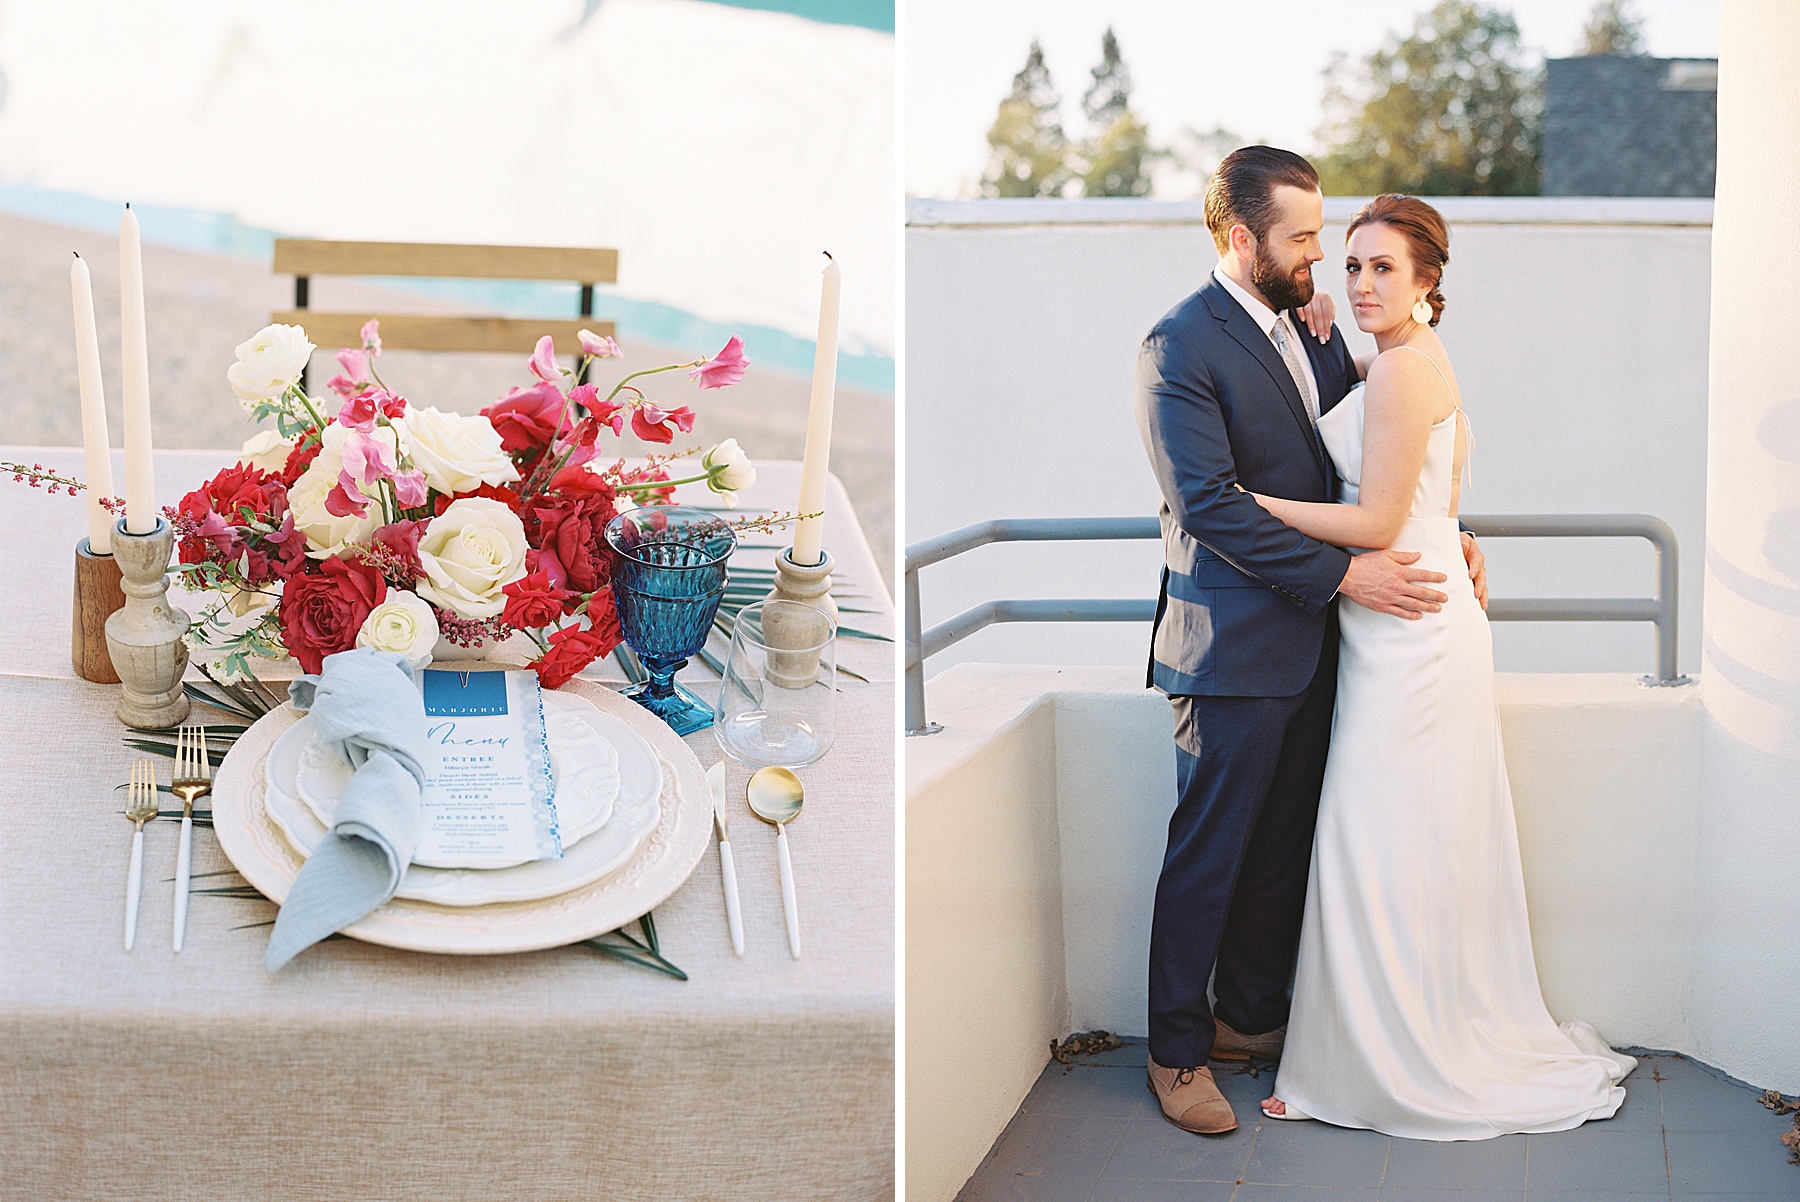 Grecian Inspired Micro-Wedding with Events by Kristina Elyse - Ash Baumgartner - Inspired by This - Sonoma Wedding Photographer_0037.jpg